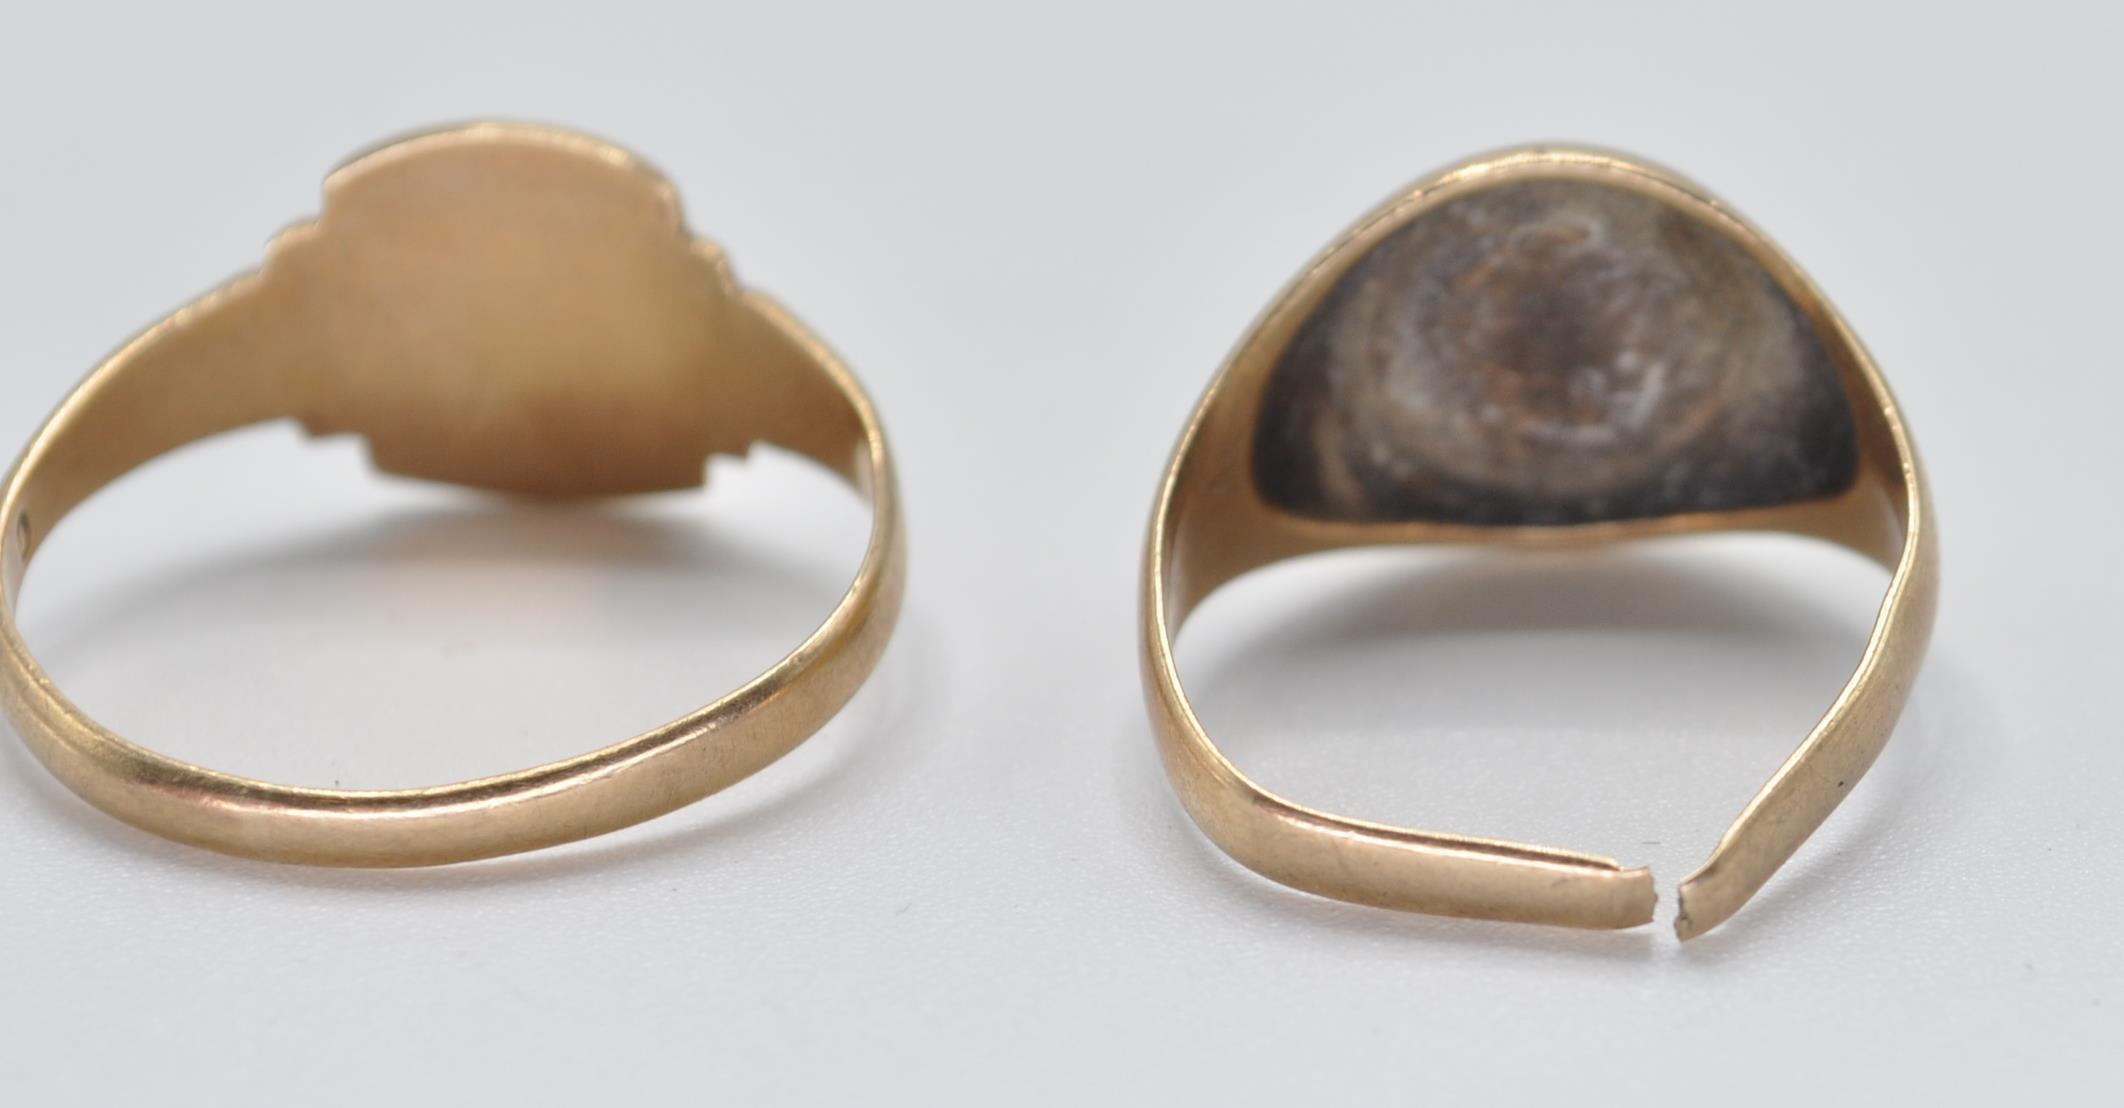 TWO VINTAGE 9CT GOLD SIGNET RINGS - Image 6 of 6